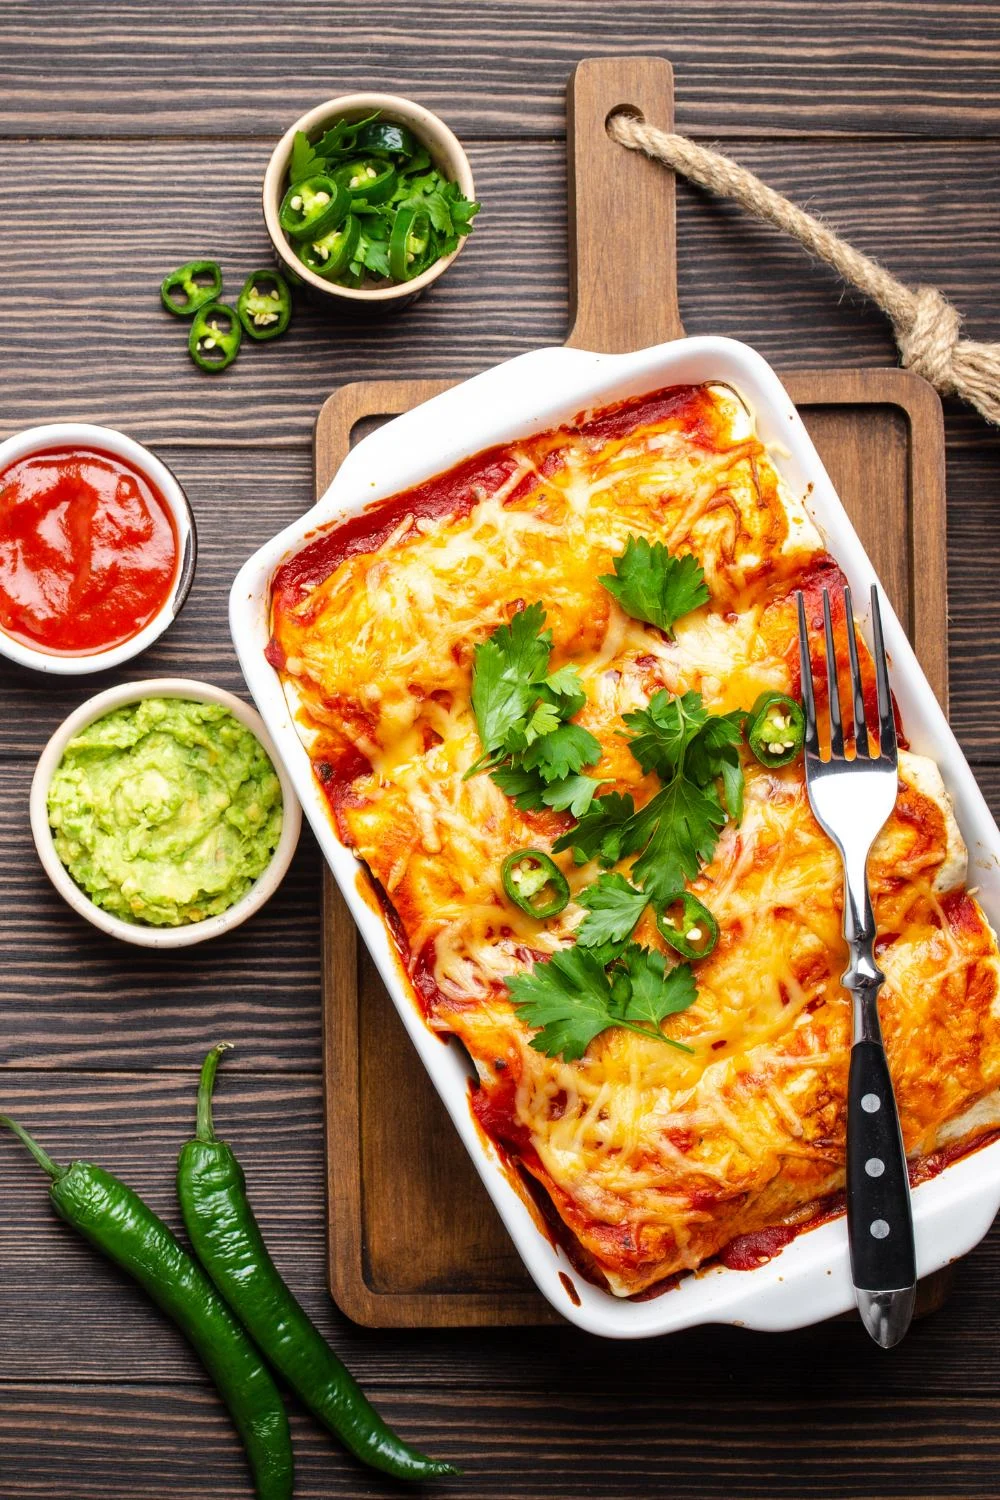 What to Serve Enchiladas With